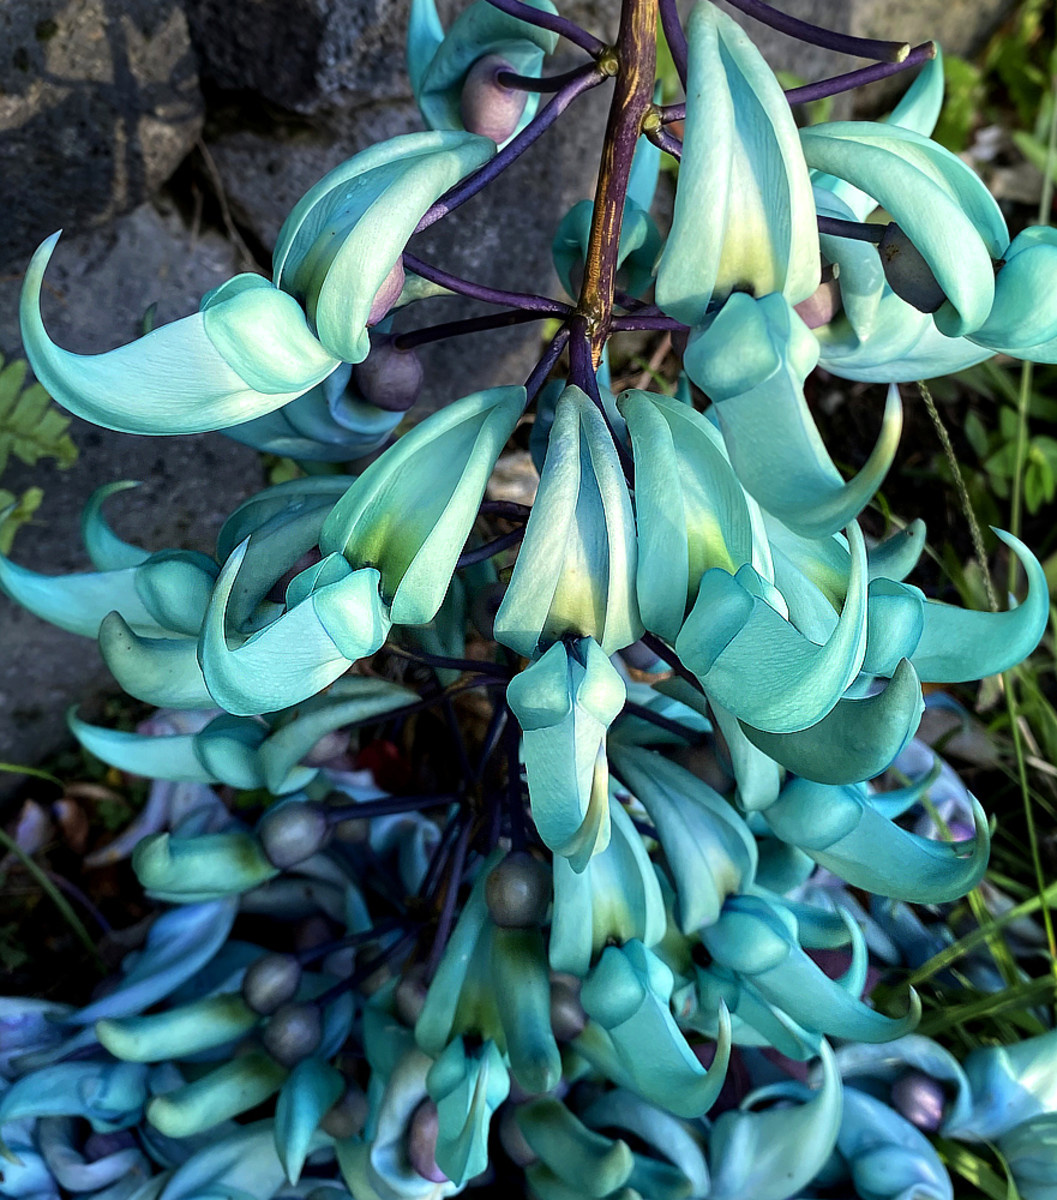 Sharp claws and hooks of Blue Jade Vine flowers.